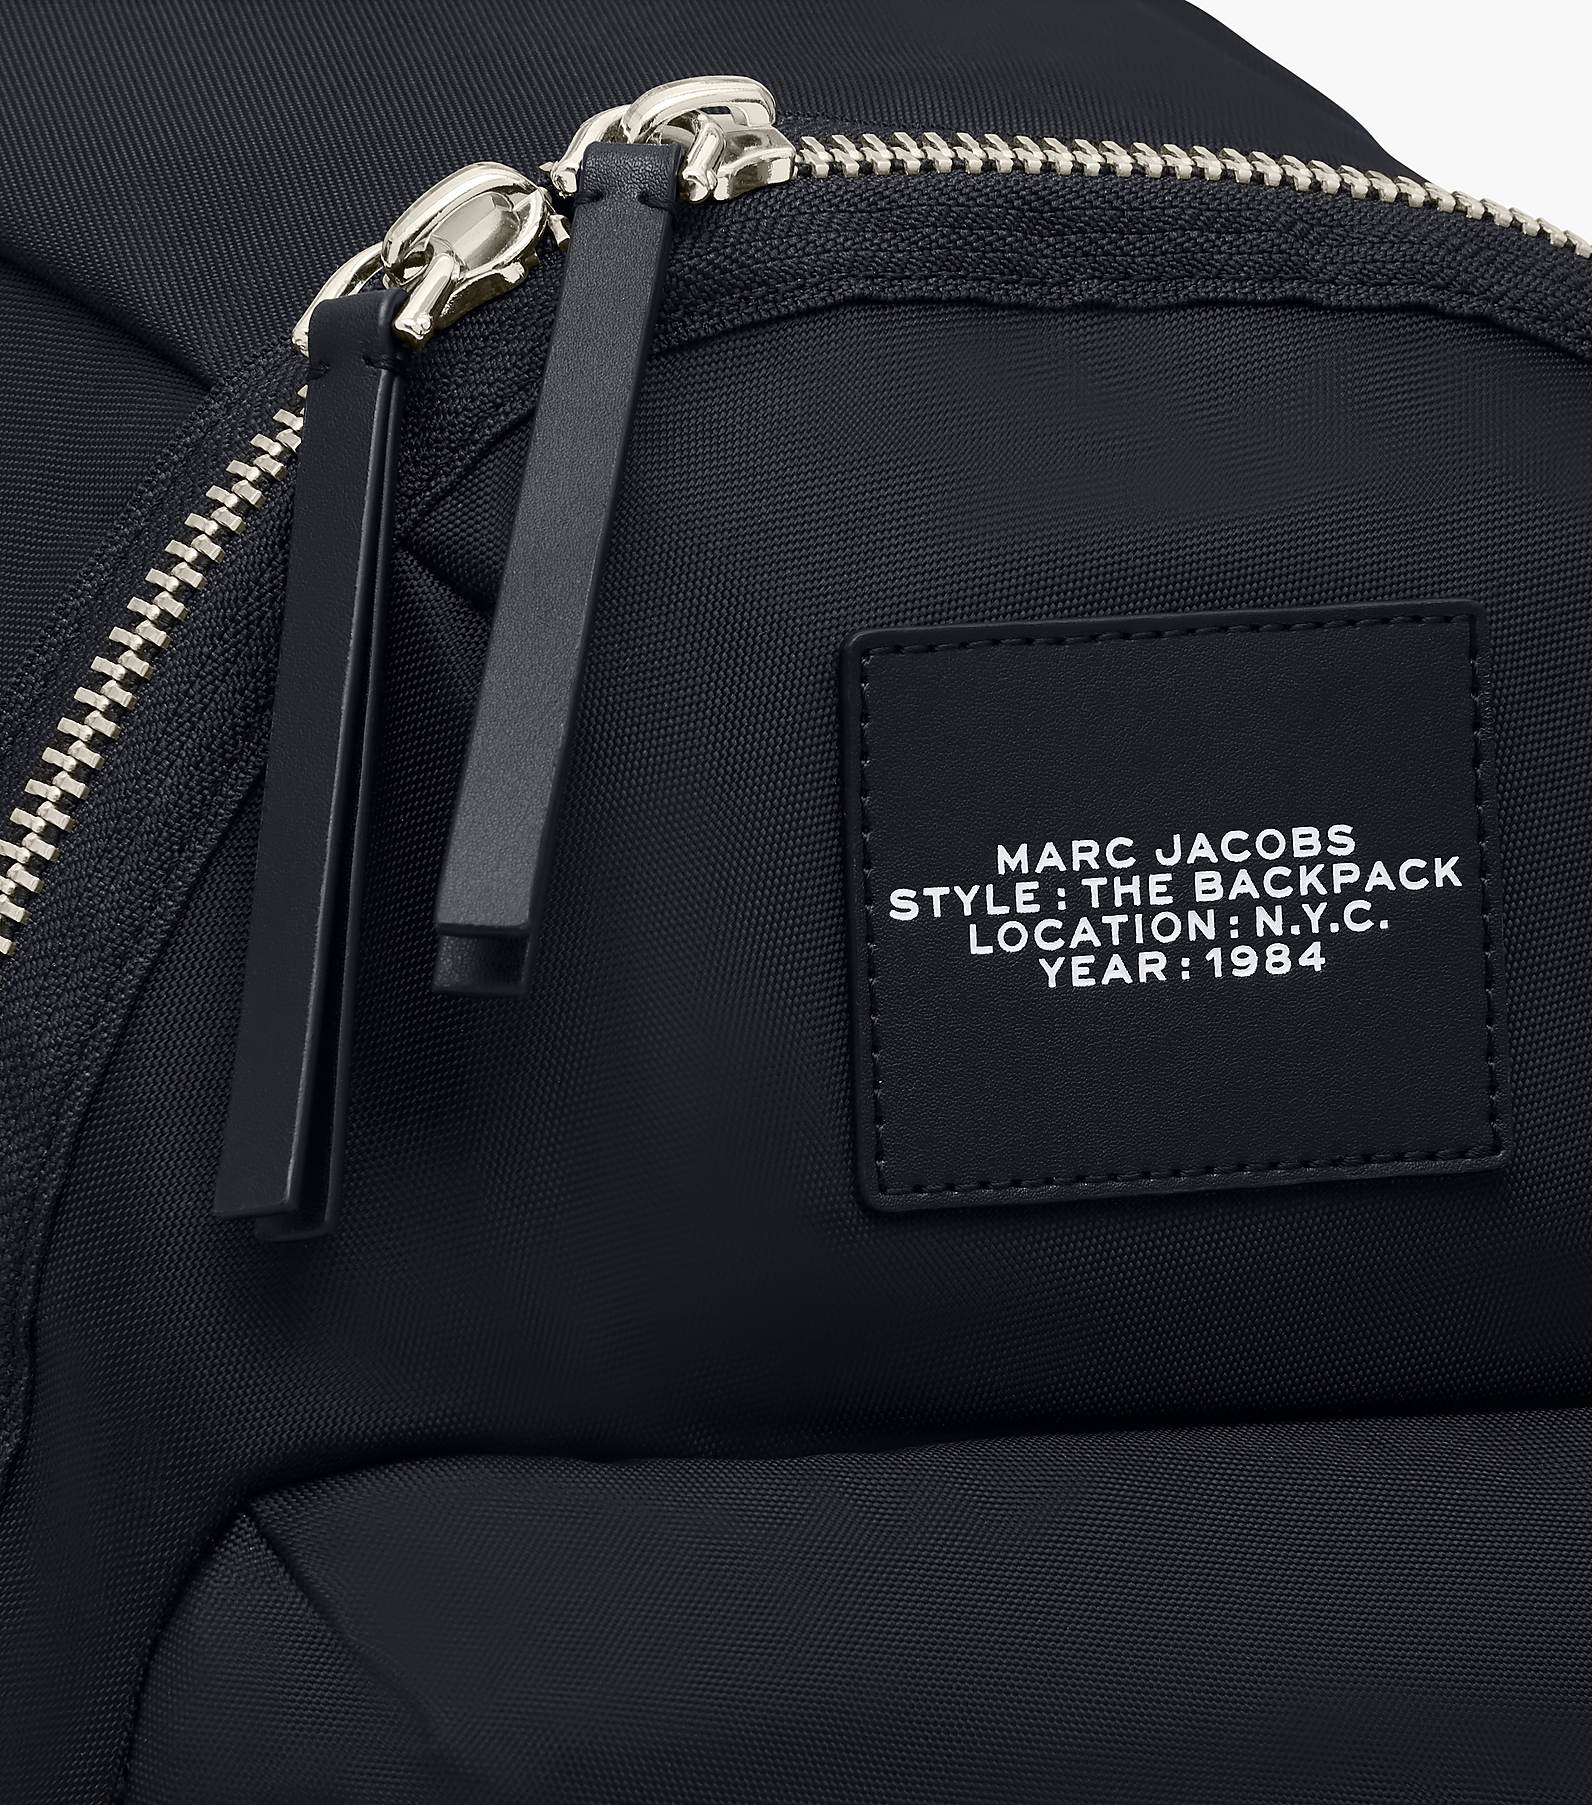 MARC JACOBS マークジェイコブス ナイロン リュックサック バックパック 2F3HBP028H02 グレー gyバッグ